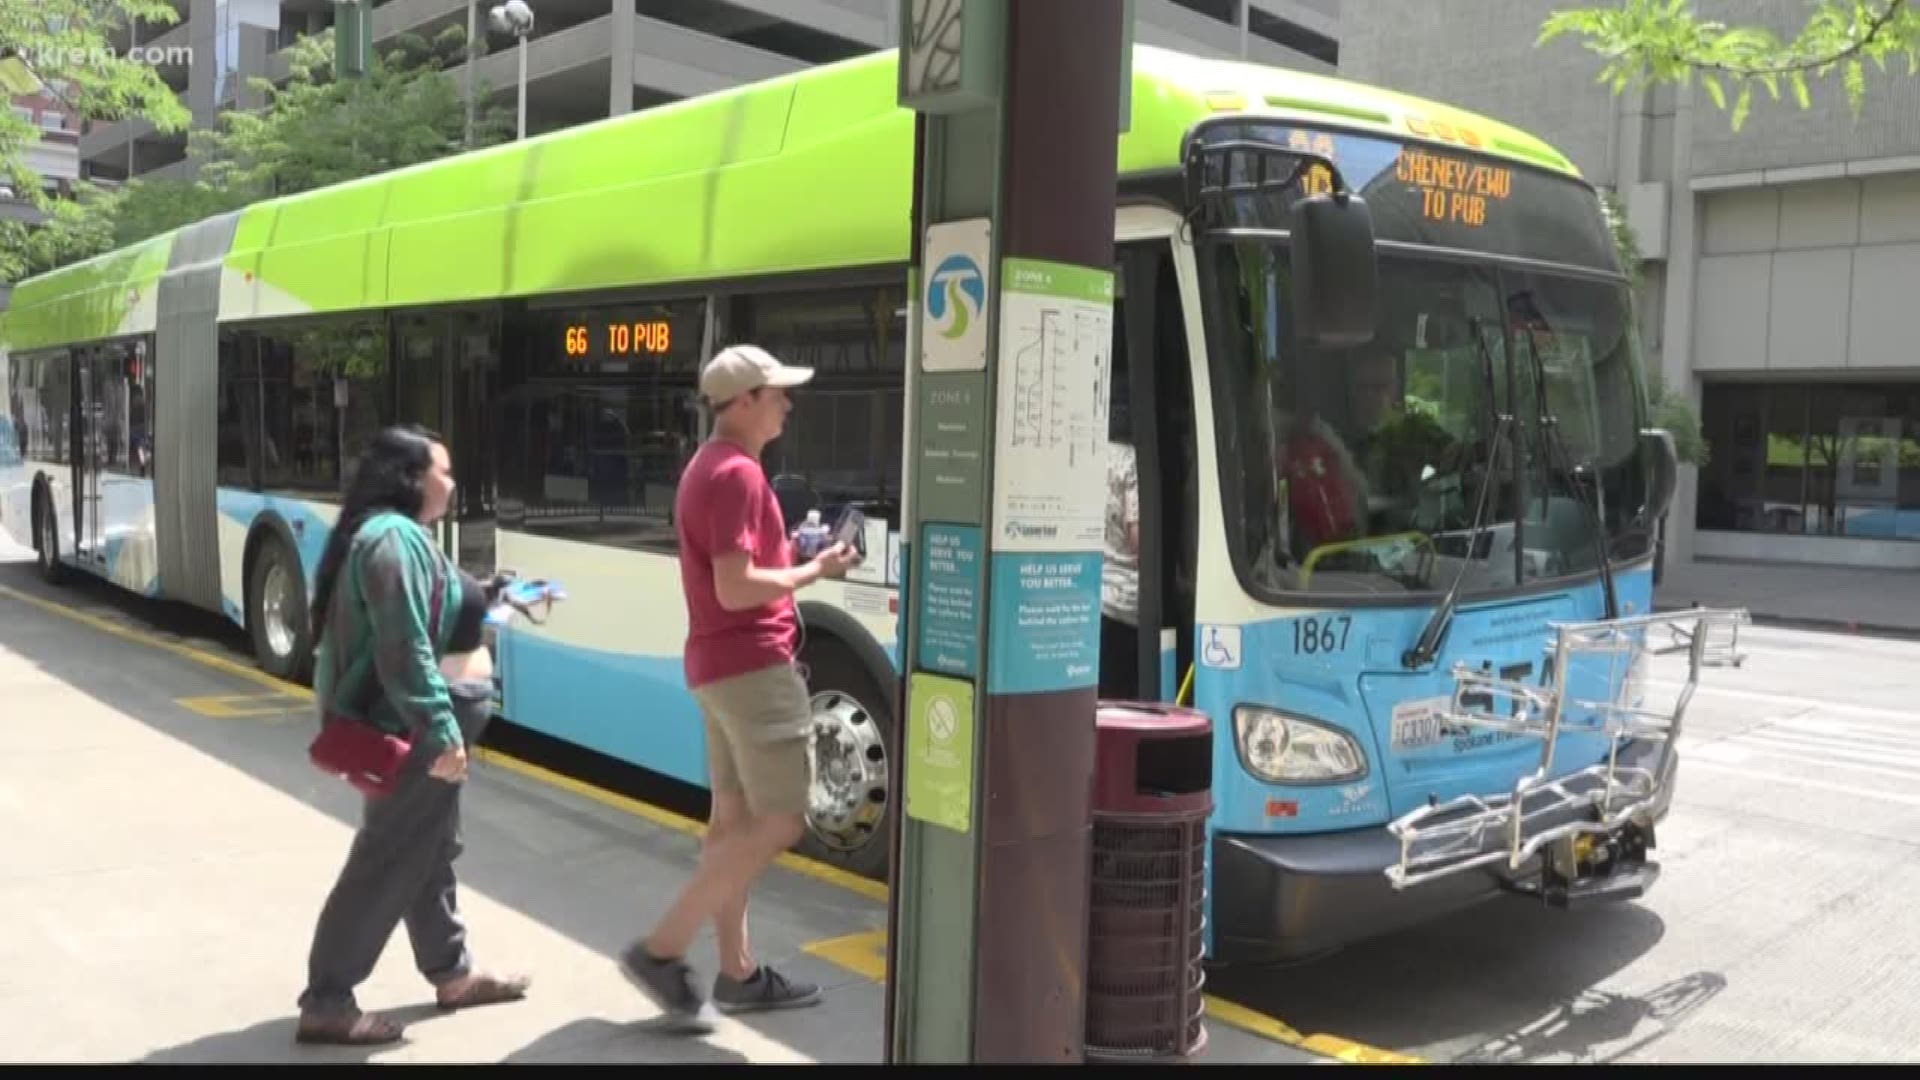 Spokane Transit Authority is offering rides for people over the age of 60 who must travel to essential destinations.